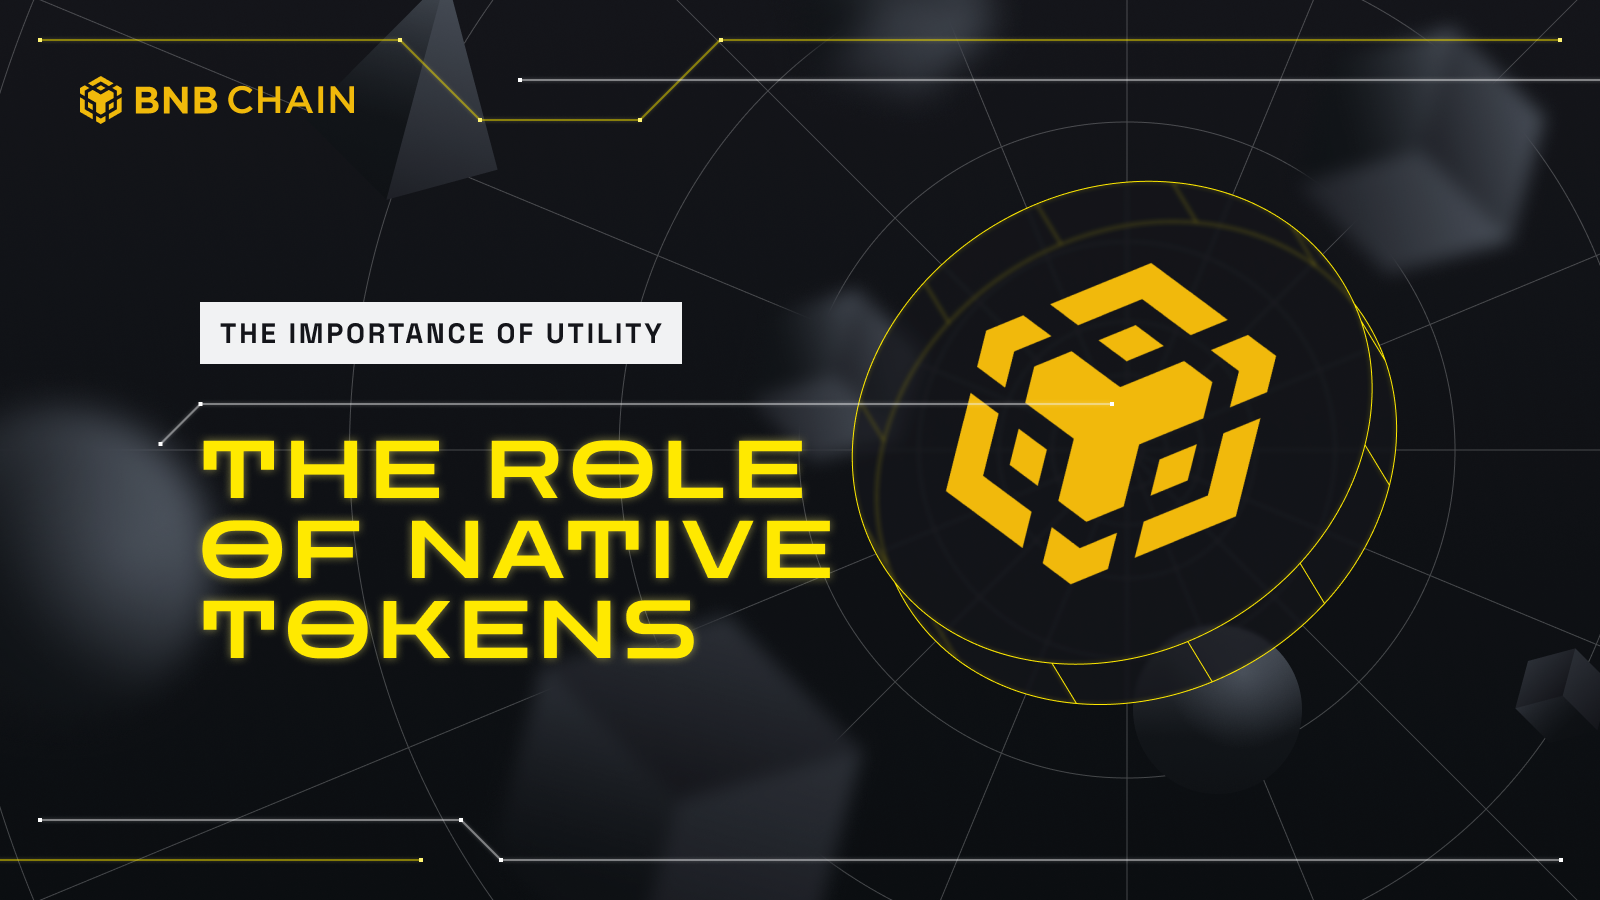 The Importance of Utility and the Role of Native Tokens